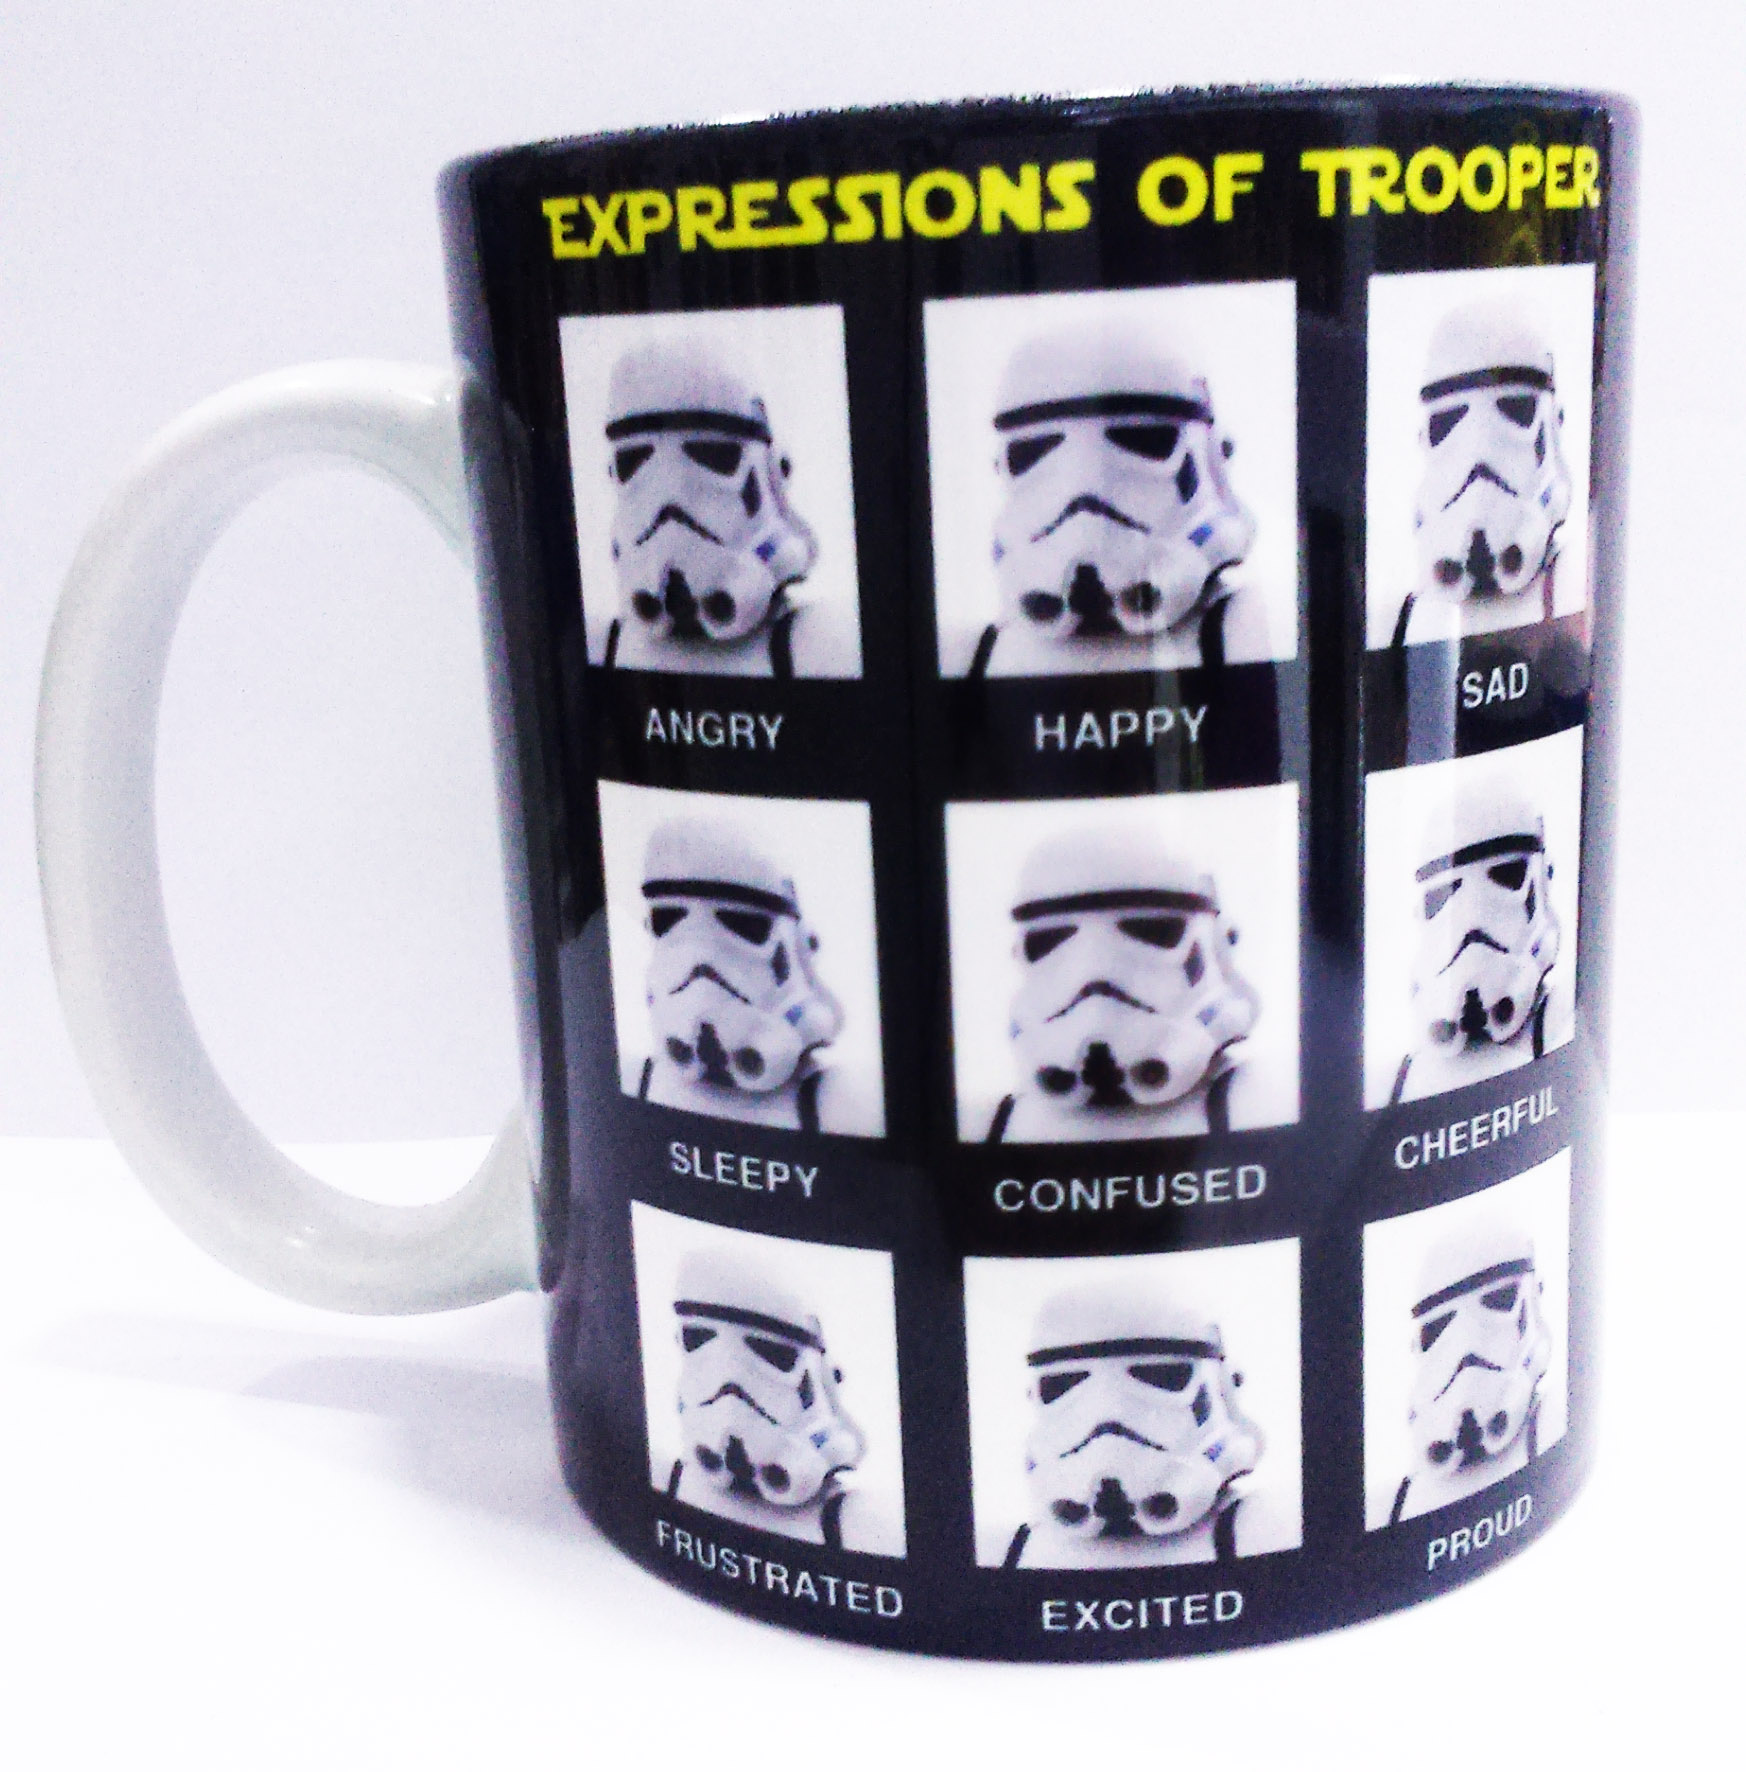 Expressions of Trooper